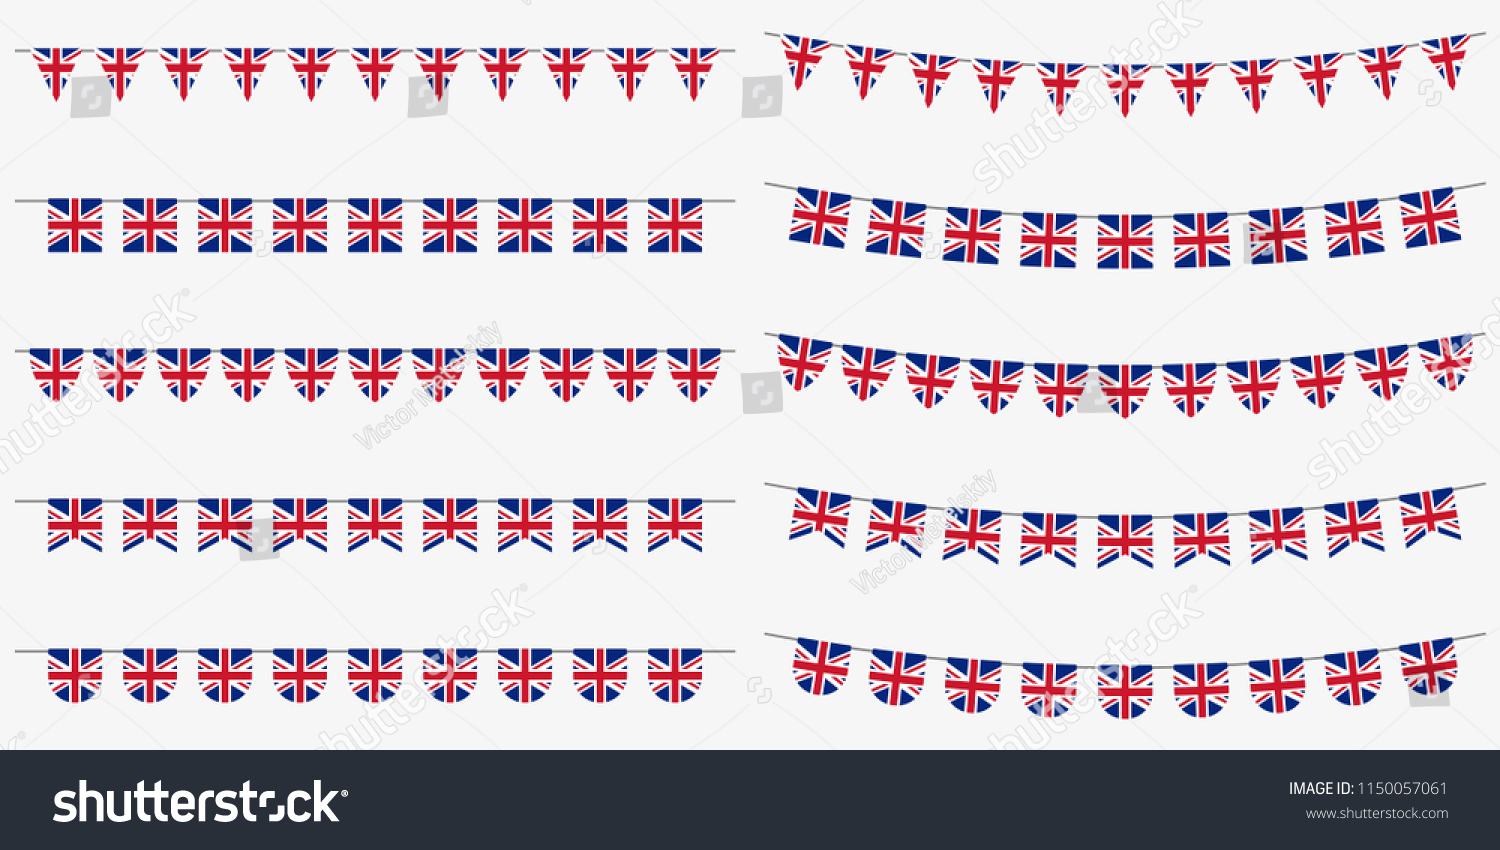 SVG of British bunting set with UK flags. Great Britain flags garland. Union Jack decoration for celebrate, party or festival. Vector illustration.  svg